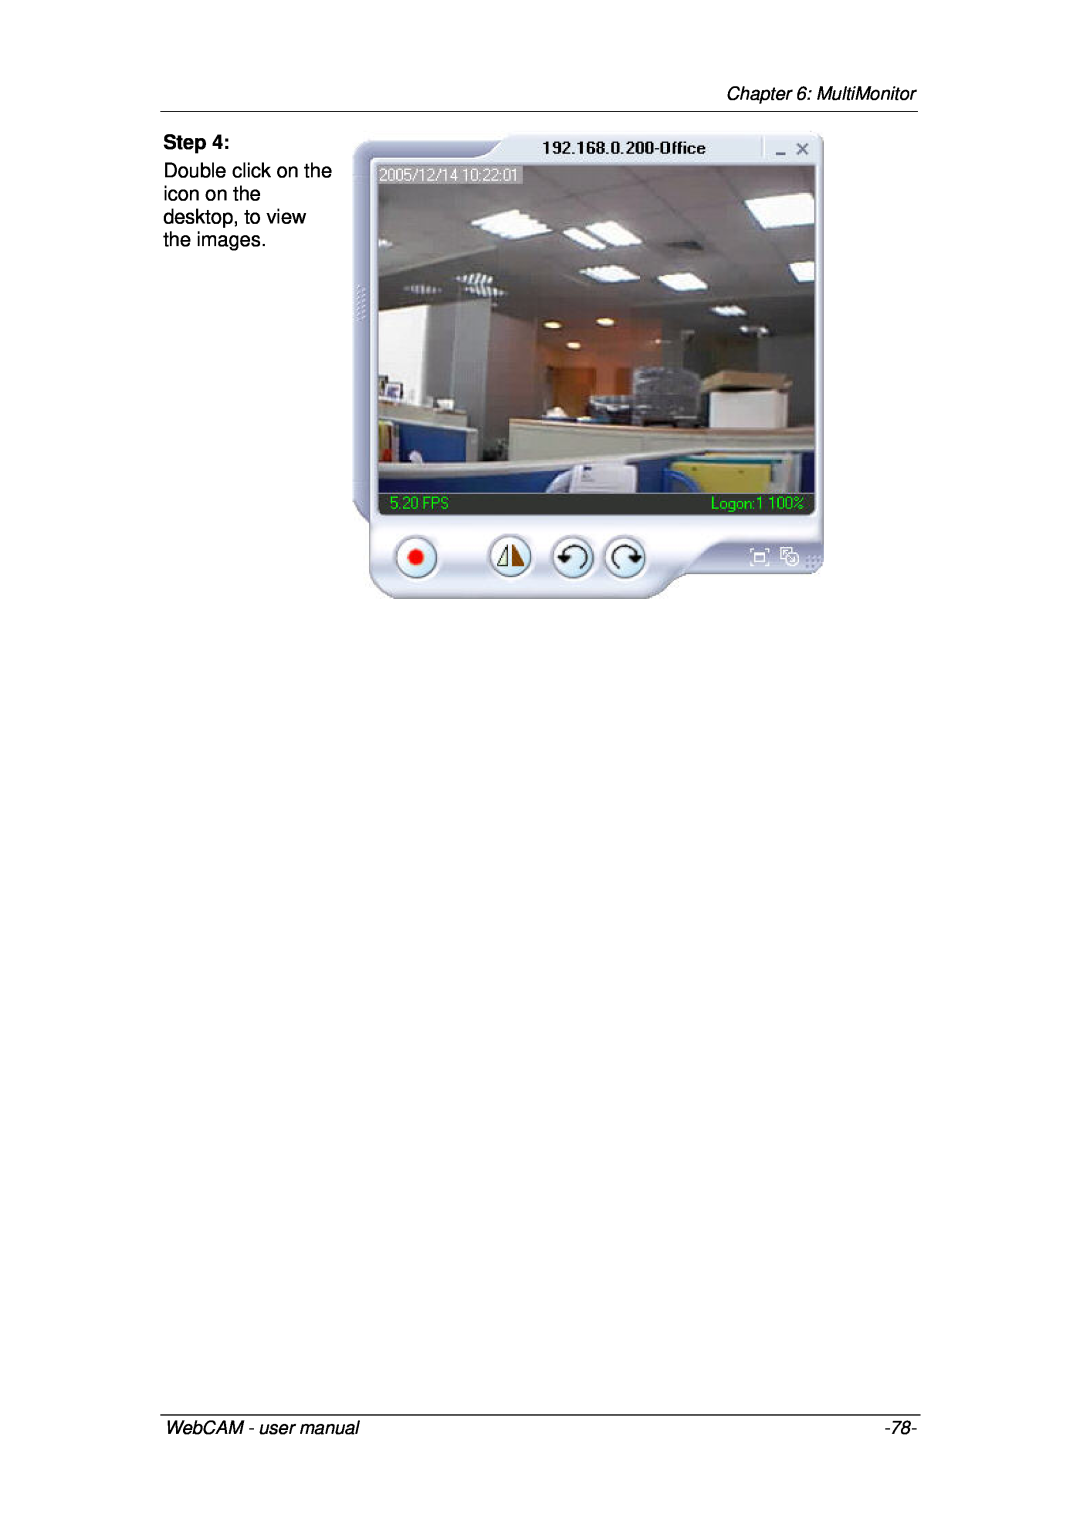 3Com iCV-01a, iCV-08 Step, Double click on the icon on the desktop, to view the images, MultiMonitor, WebCAM - user manual 